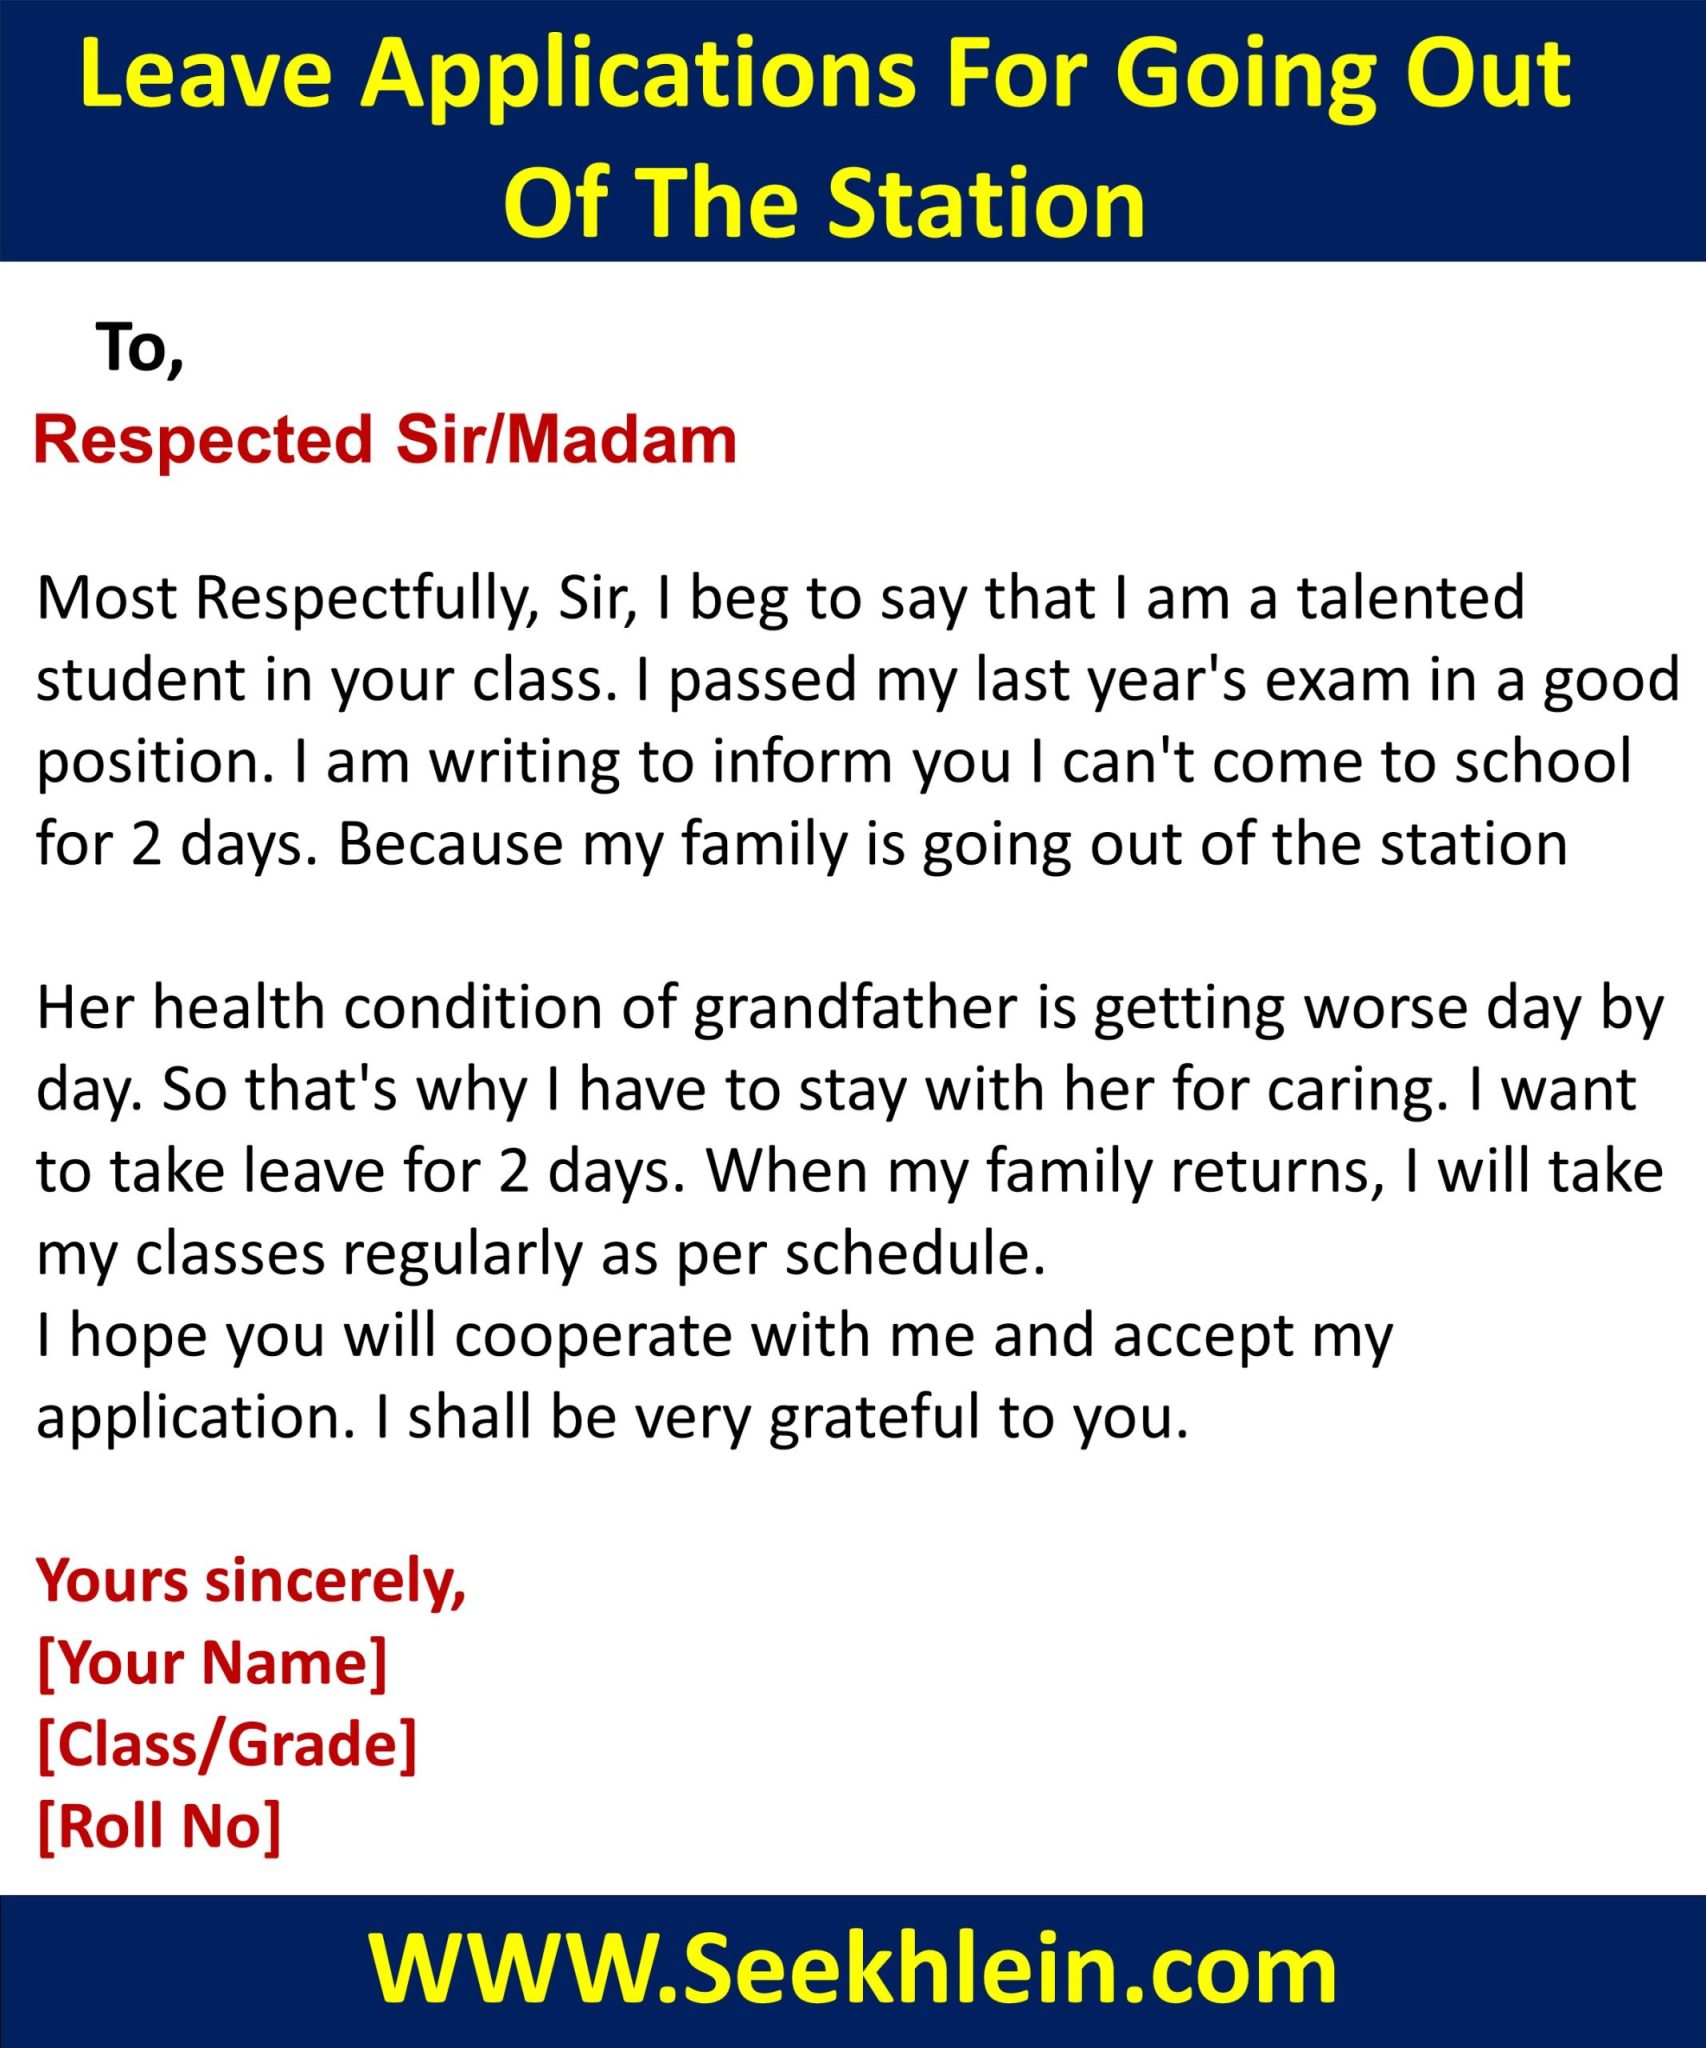 Leave Application For Going Out Of Station